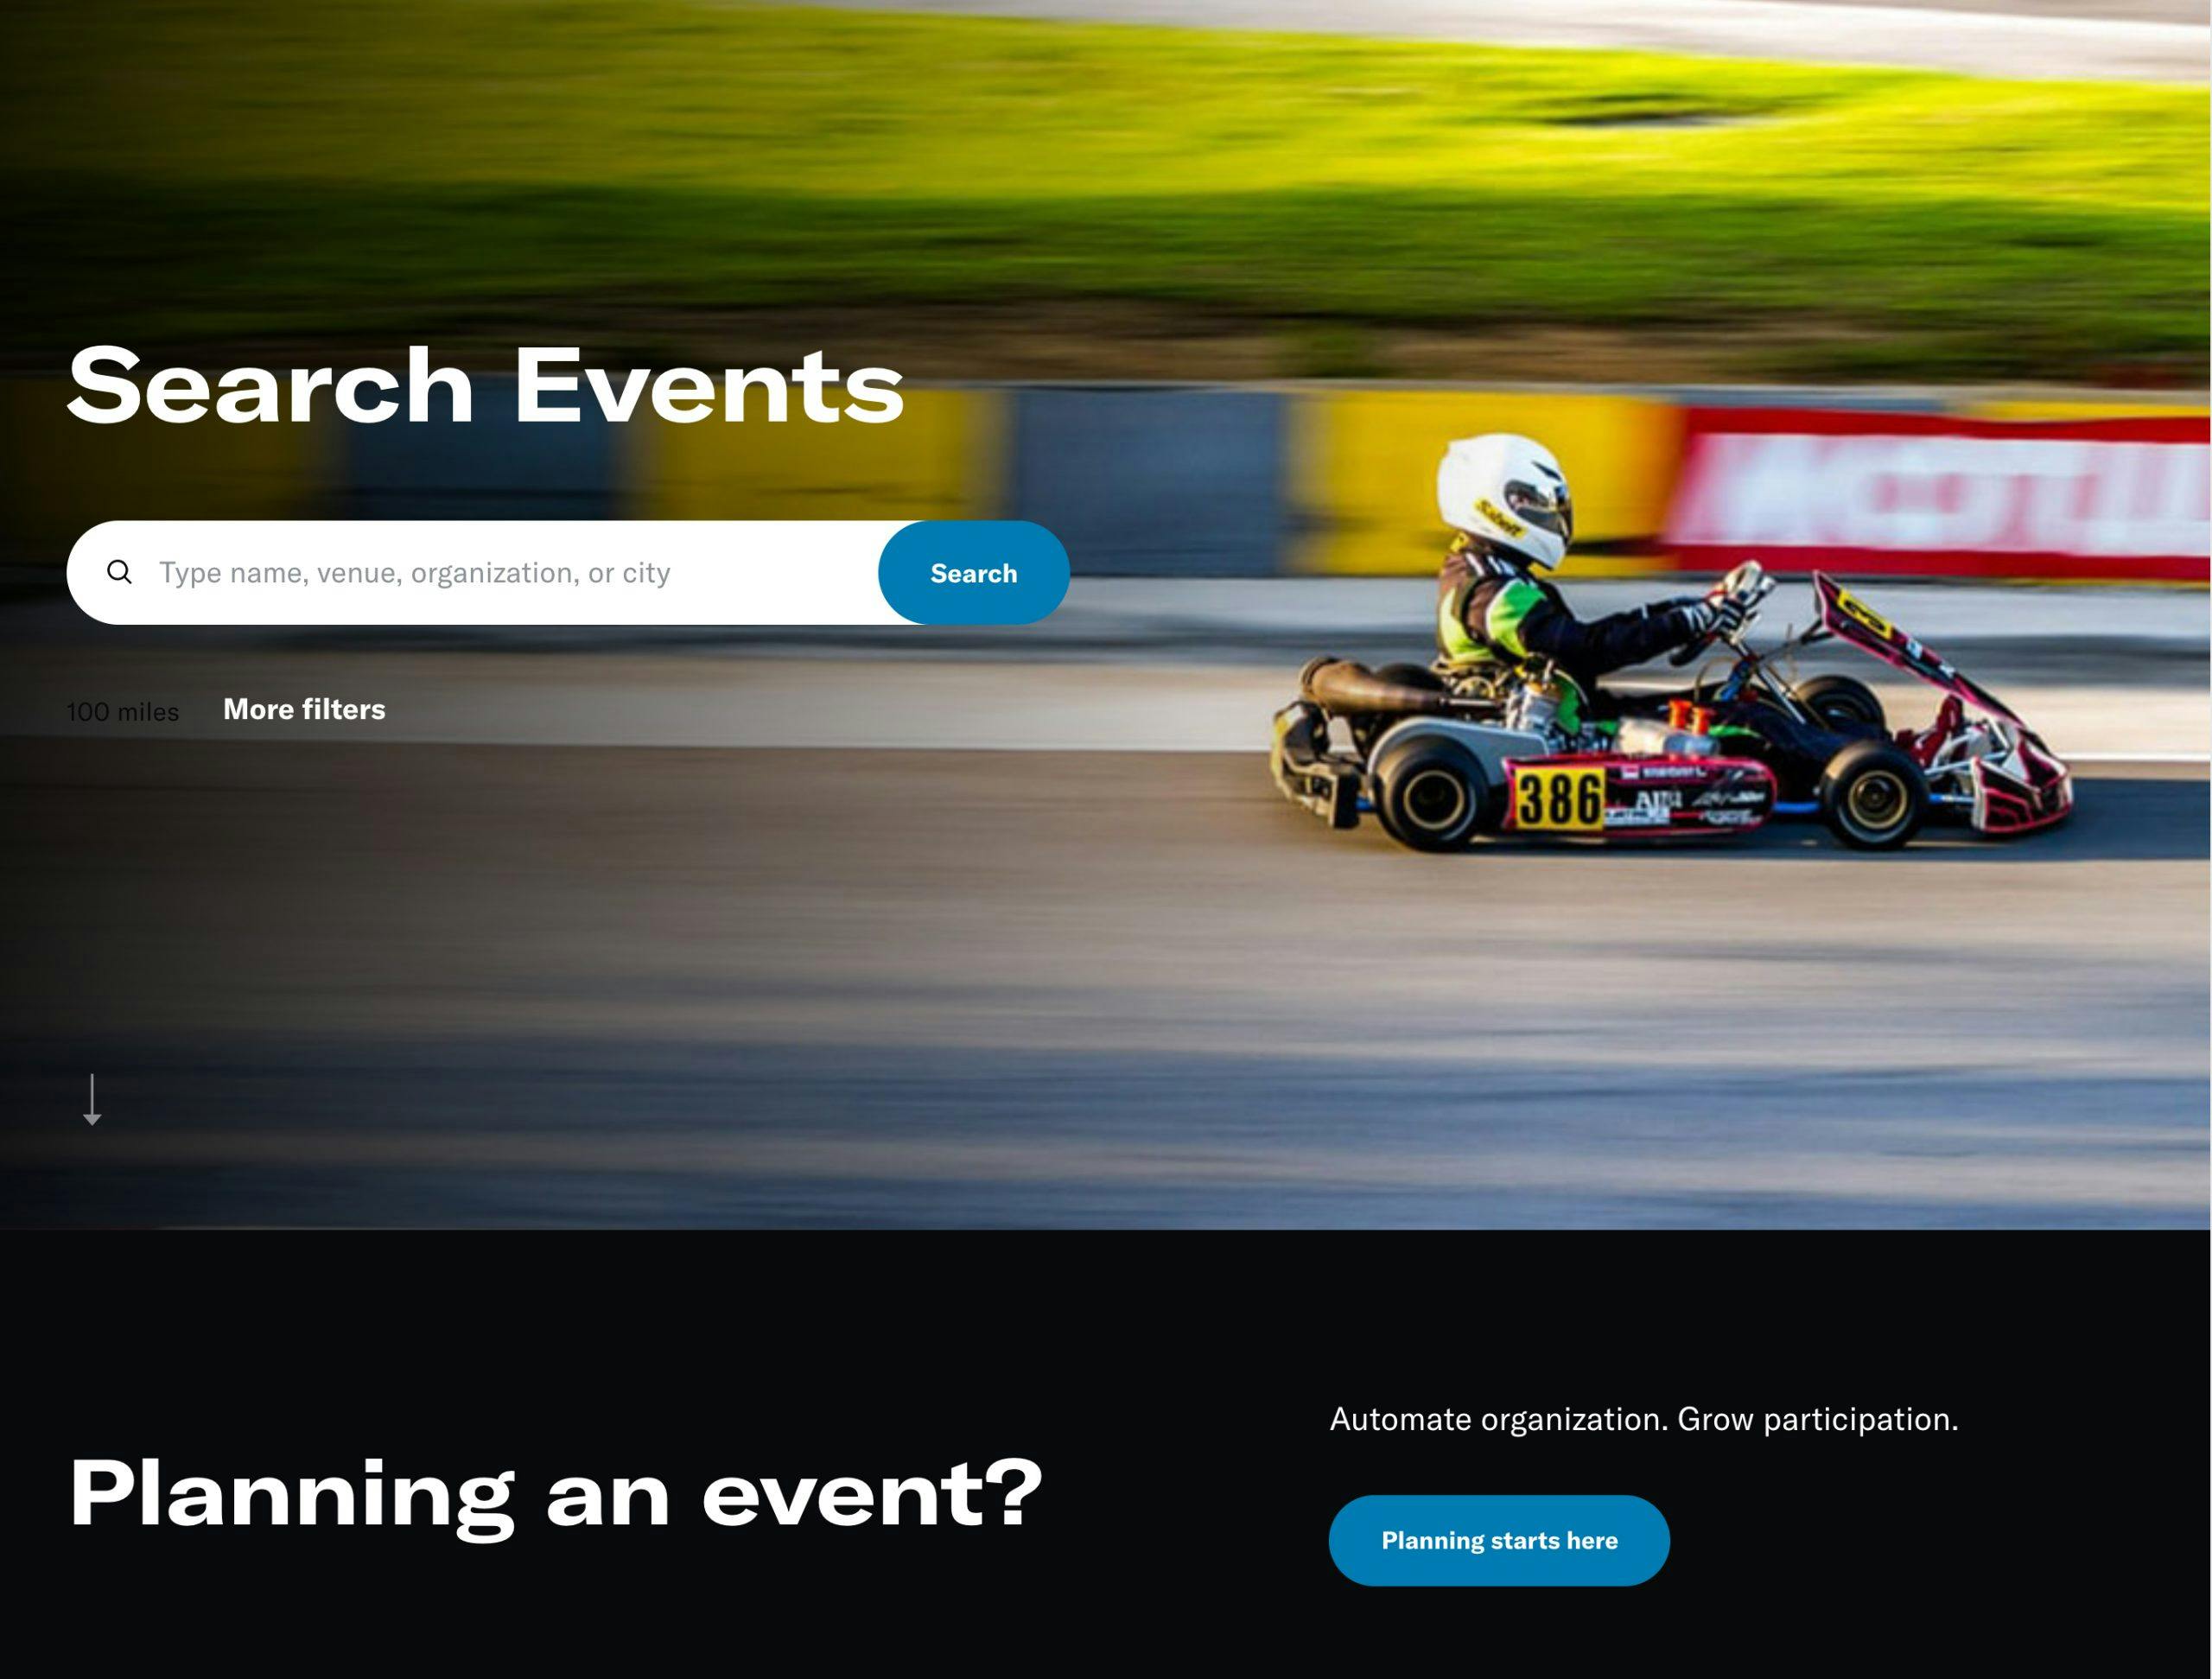 How to get started gaming and racing cars online - Hagerty Media